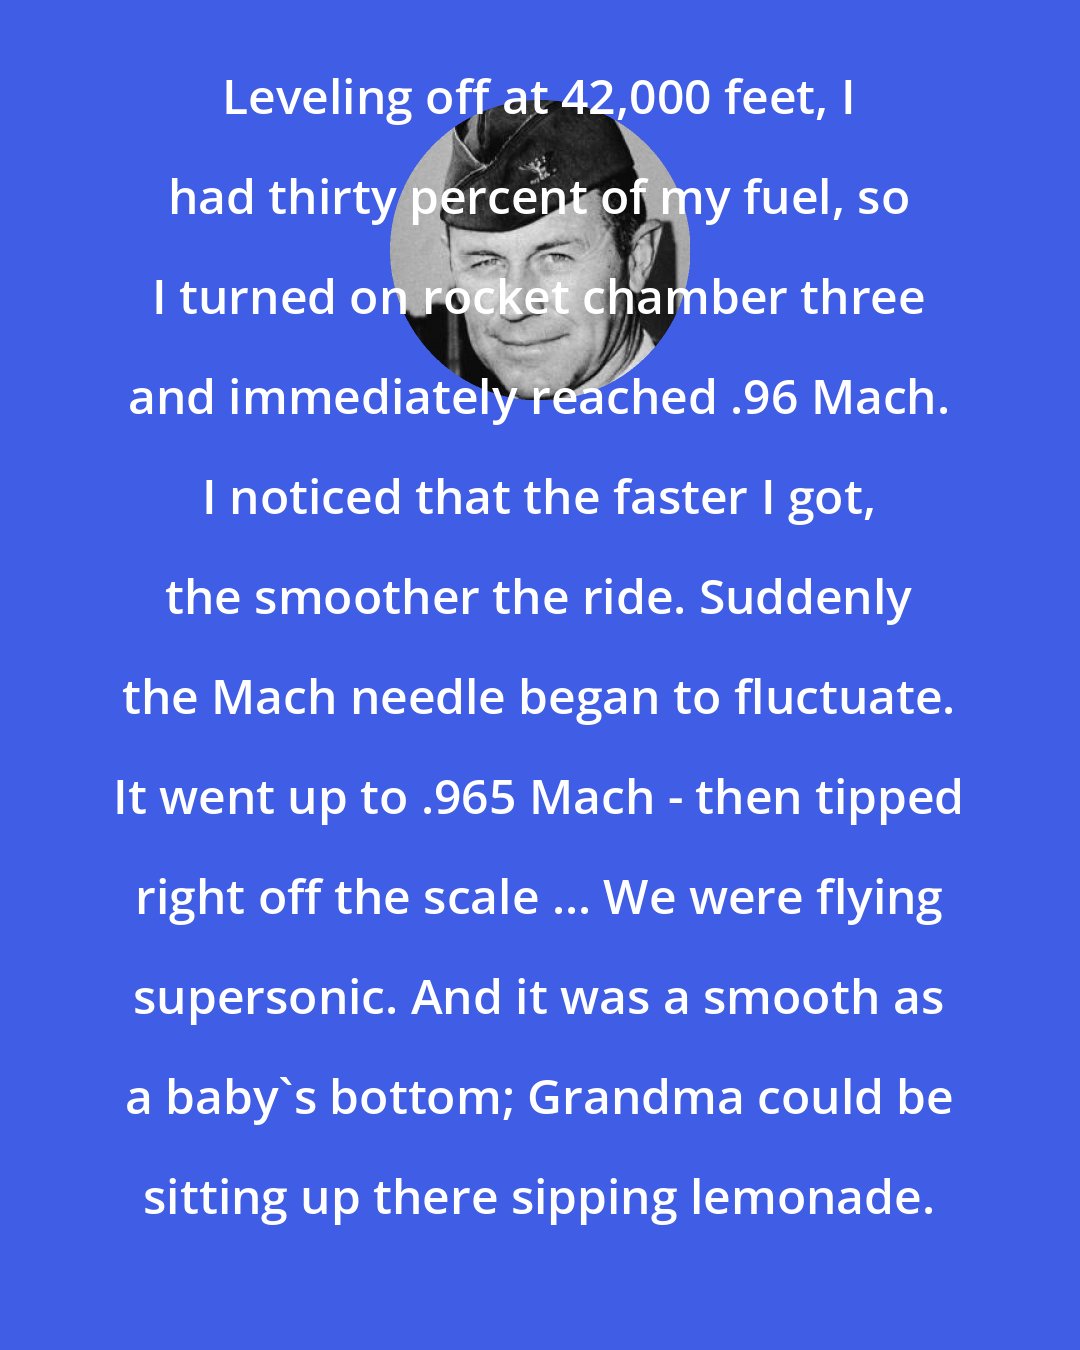 Chuck Yeager: Leveling off at 42,000 feet, I had thirty percent of my fuel, so I turned on rocket chamber three and immediately reached .96 Mach. I noticed that the faster I got, the smoother the ride. Suddenly the Mach needle began to fluctuate. It went up to .965 Mach - then tipped right off the scale ... We were flying supersonic. And it was a smooth as a baby's bottom; Grandma could be sitting up there sipping lemonade.